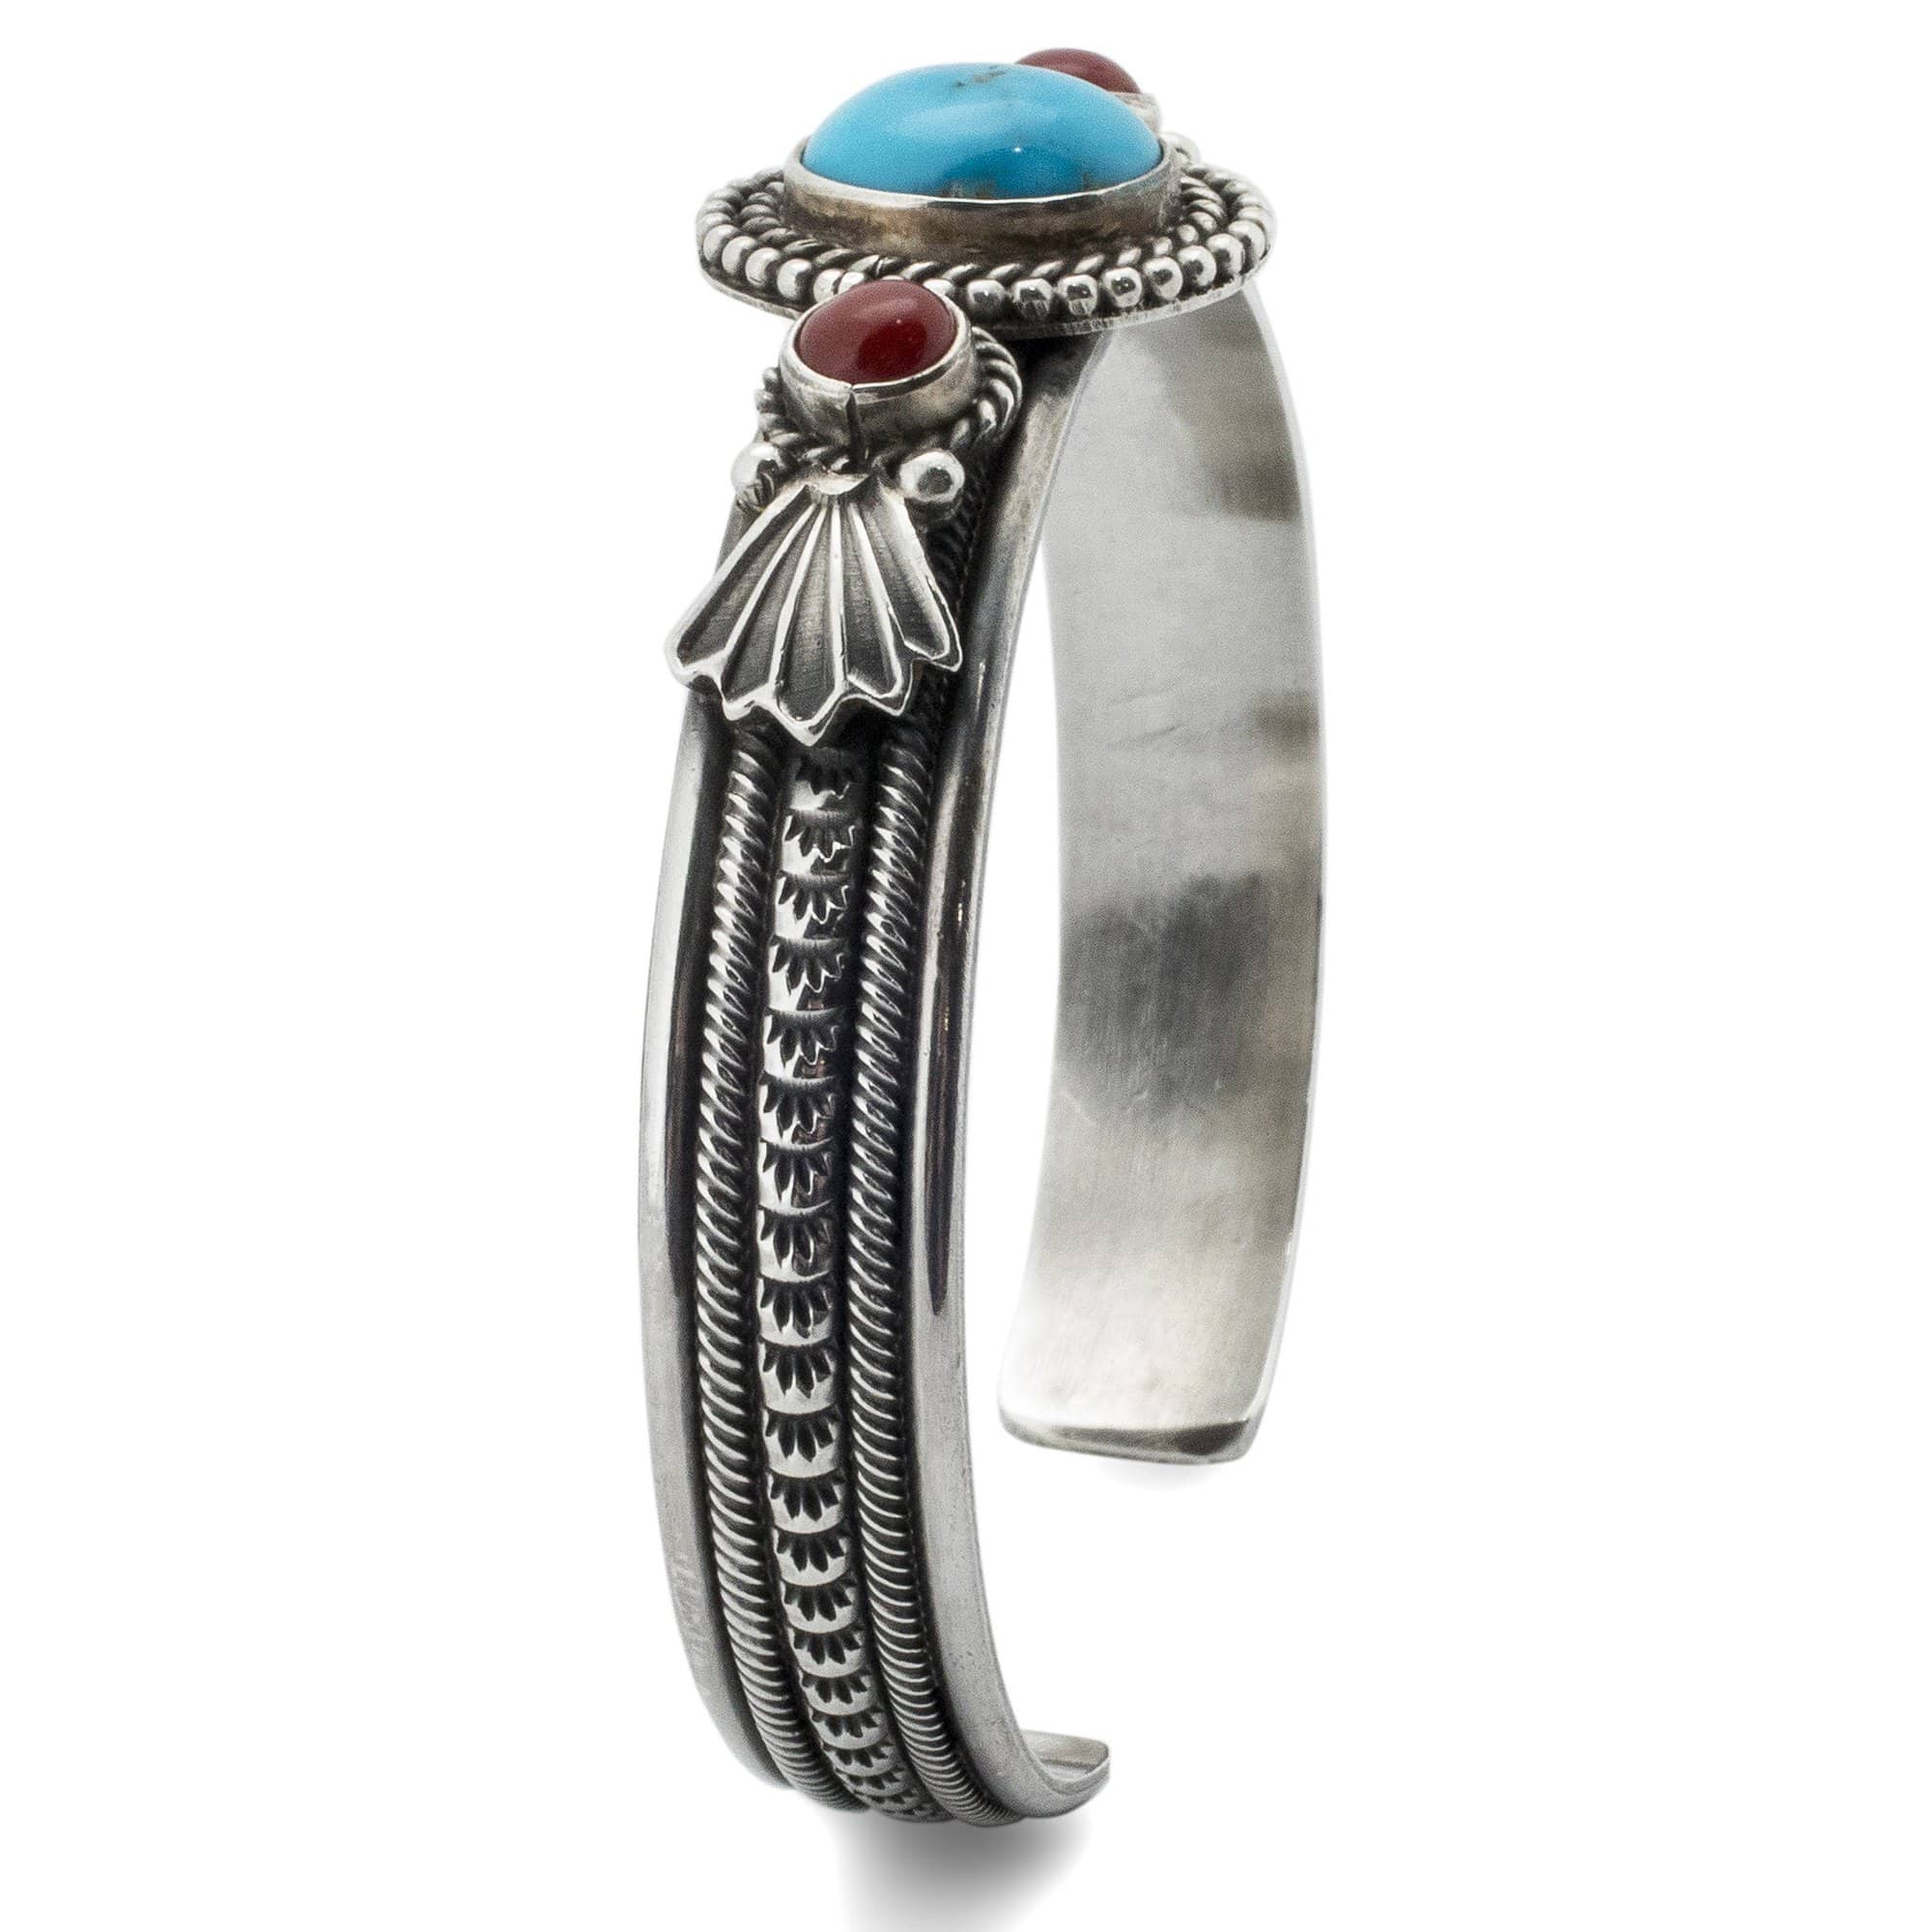 Kalifano Native American Jewelry Navajo Kingman Turquoise and Coral USA Native American Made 925 Sterling Silver Cuff NAB1200.002